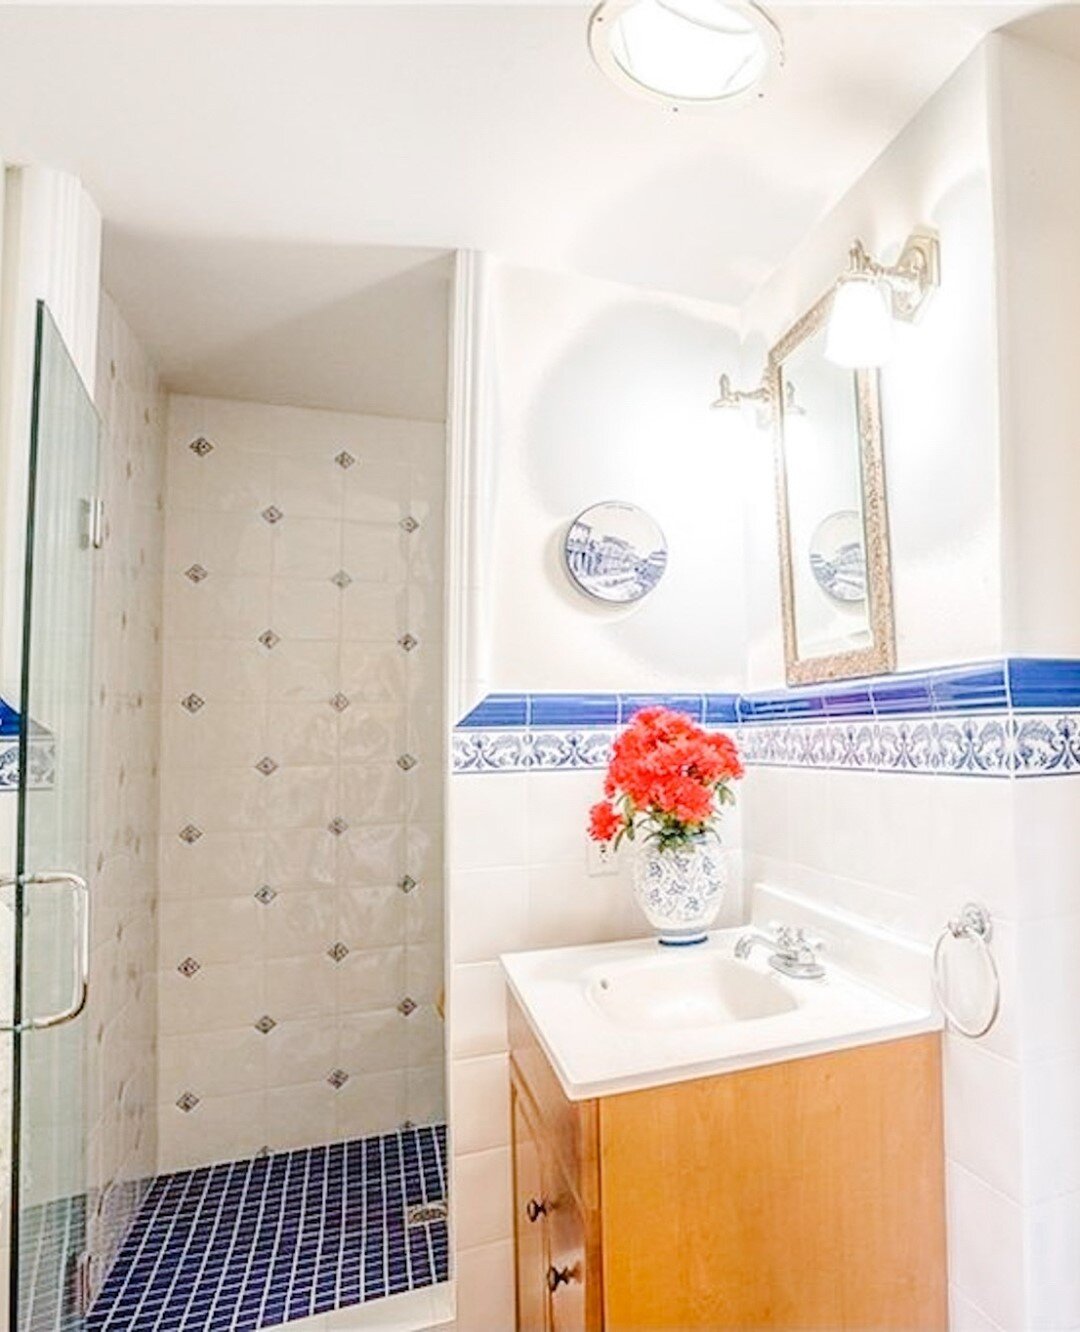 This cobalt blue and white bathroom reminds us of a sunny and vibrant Mediterranean town.